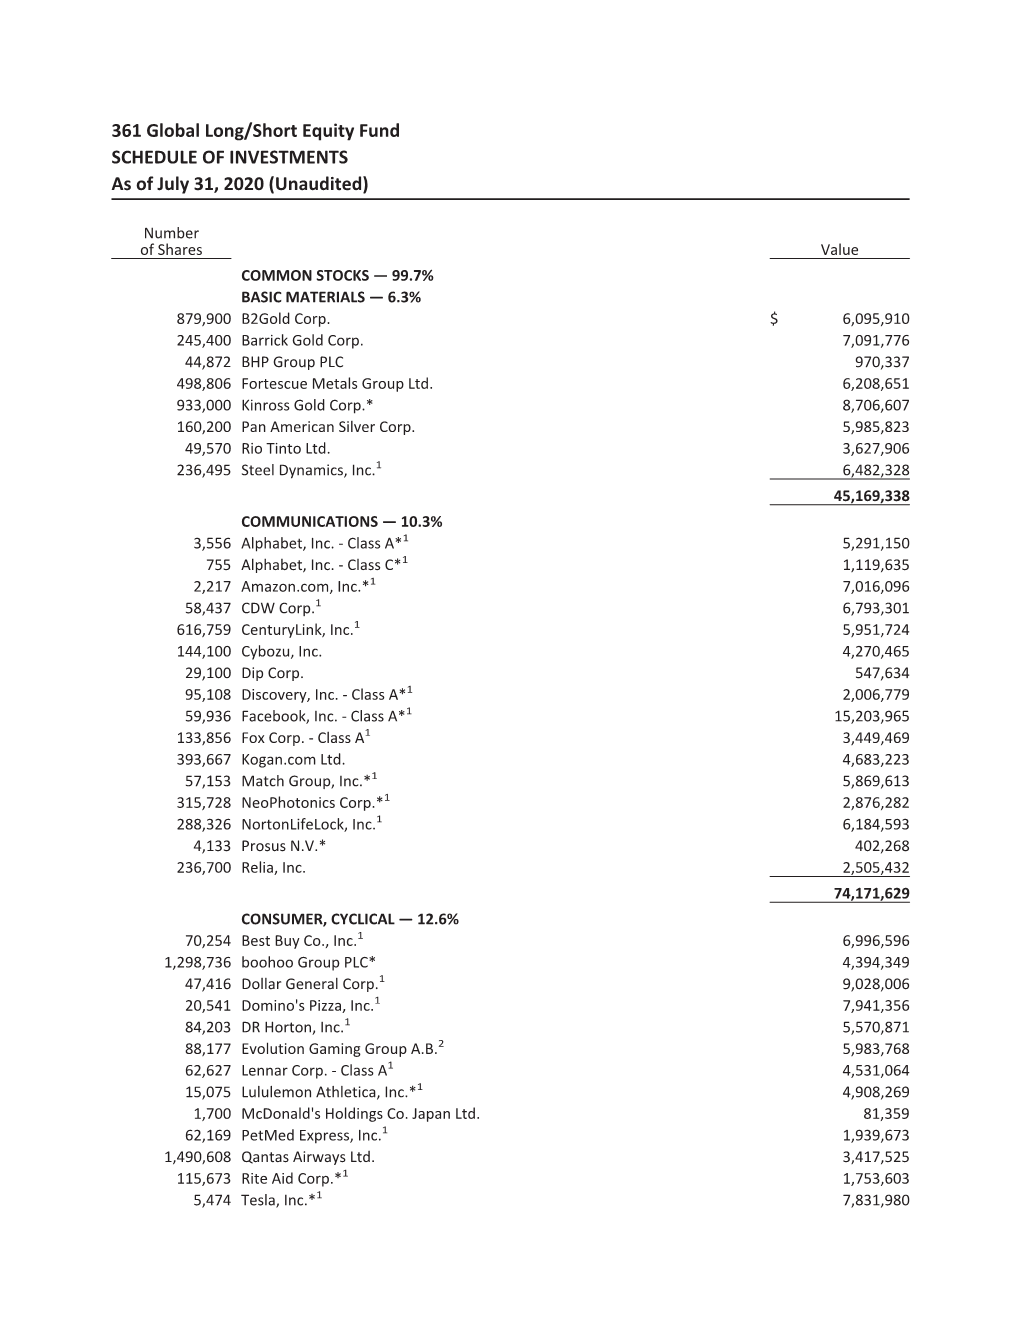 361 Global Long/Short Equity Fund SCHEDULE of INVESTMENTS As of July 31, 2020 (Unaudited)